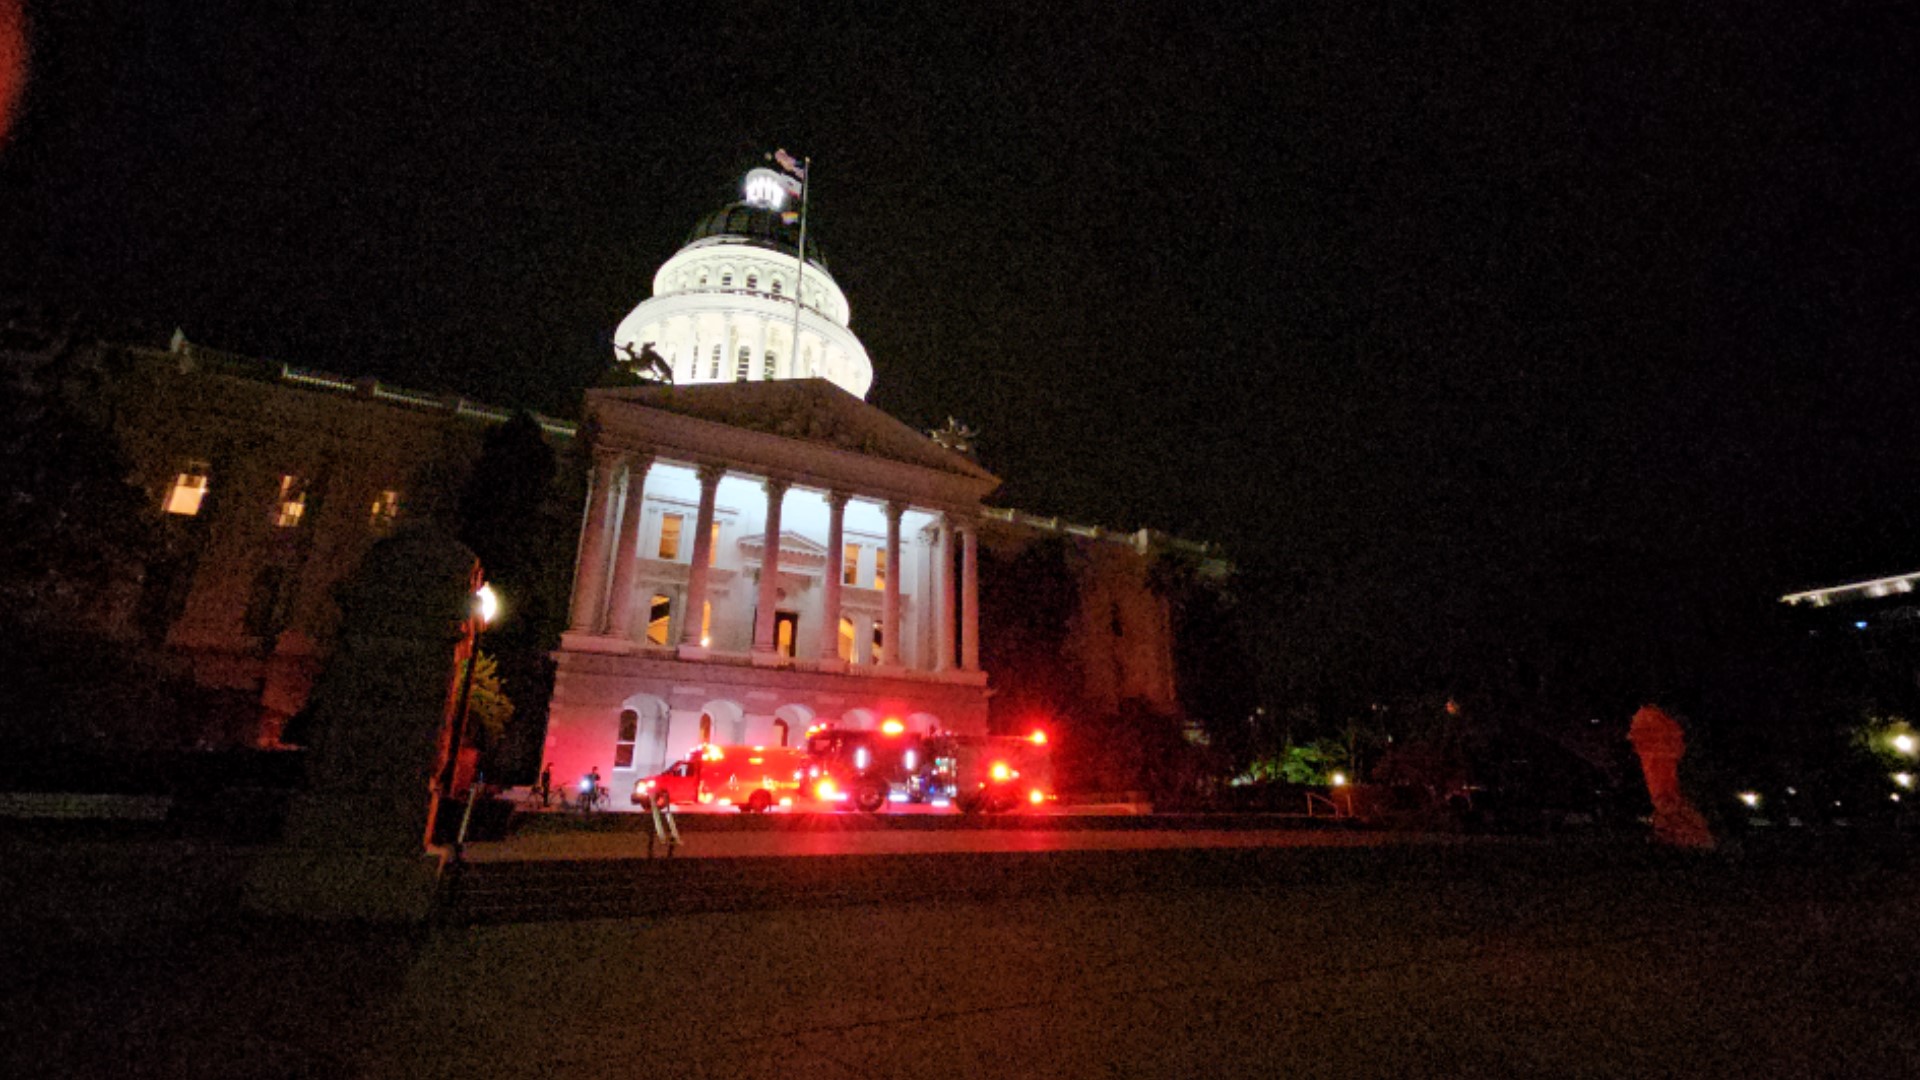 Officers found a person with at least one non-life-threatening gunshot wound on the steps of the California State Capitol.